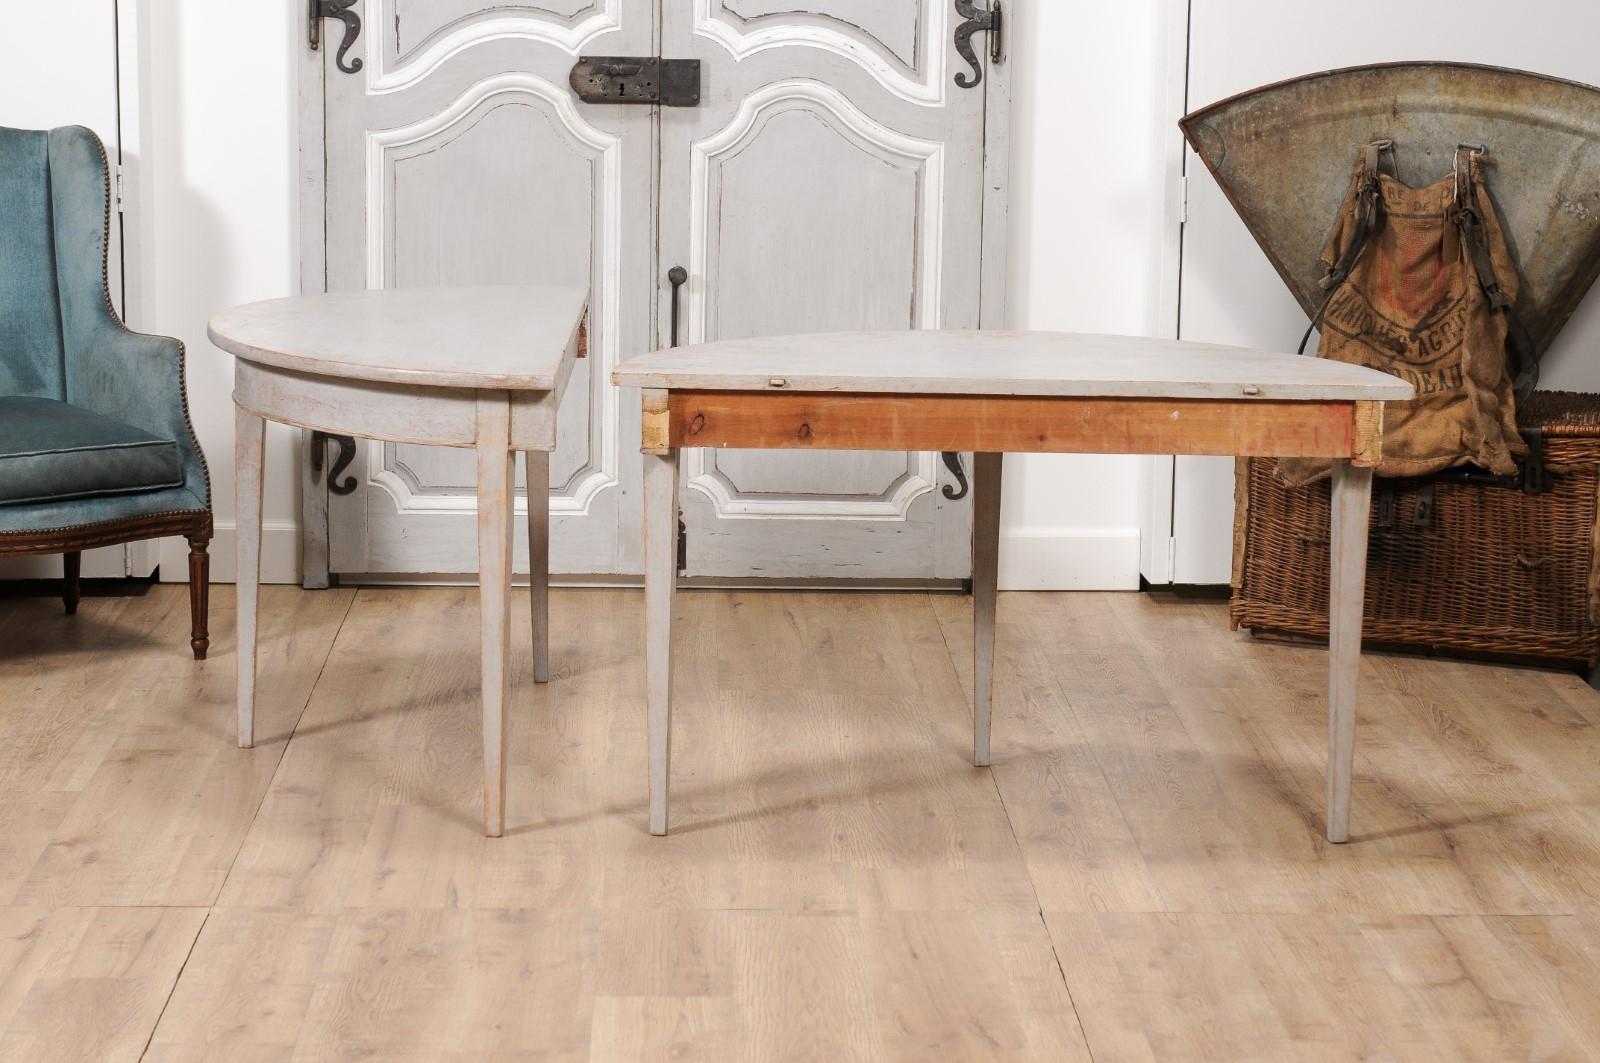 1860s Gustavian Style Swedish Painted Demi-Lune Tables with Tapered Legs For Sale 4